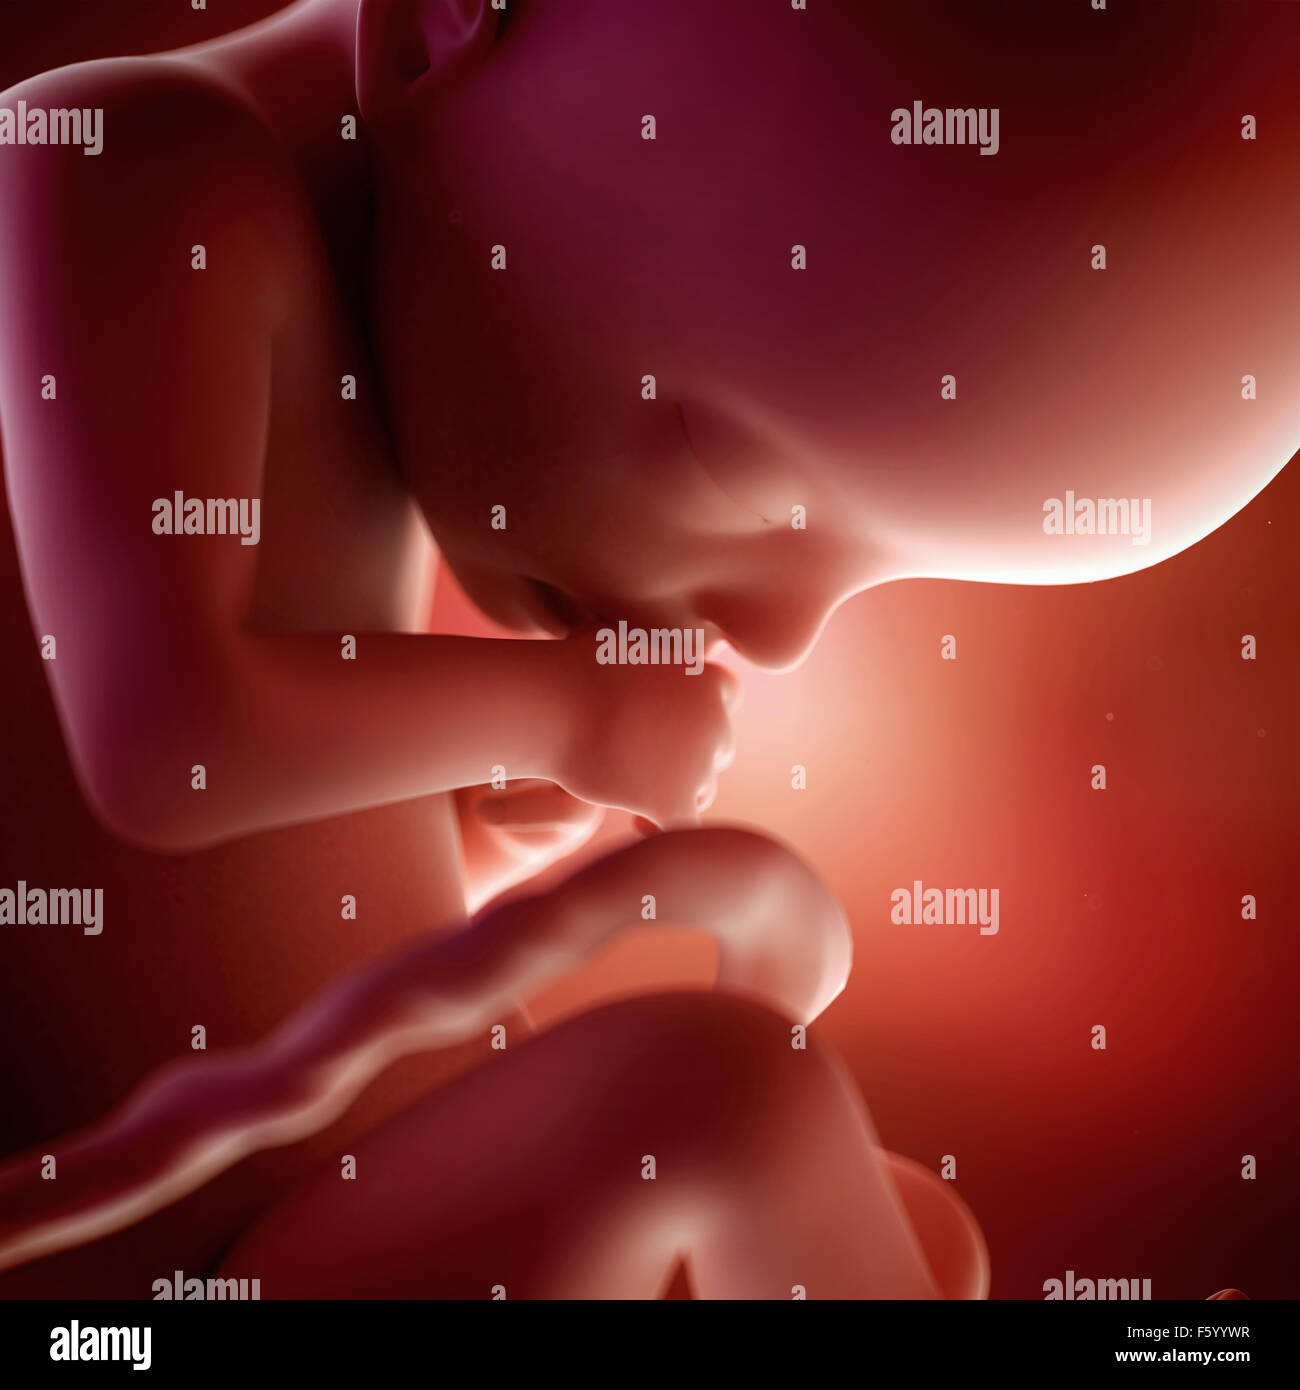 medical accurate 3d illustration of a fetus week 22 Stock Photo